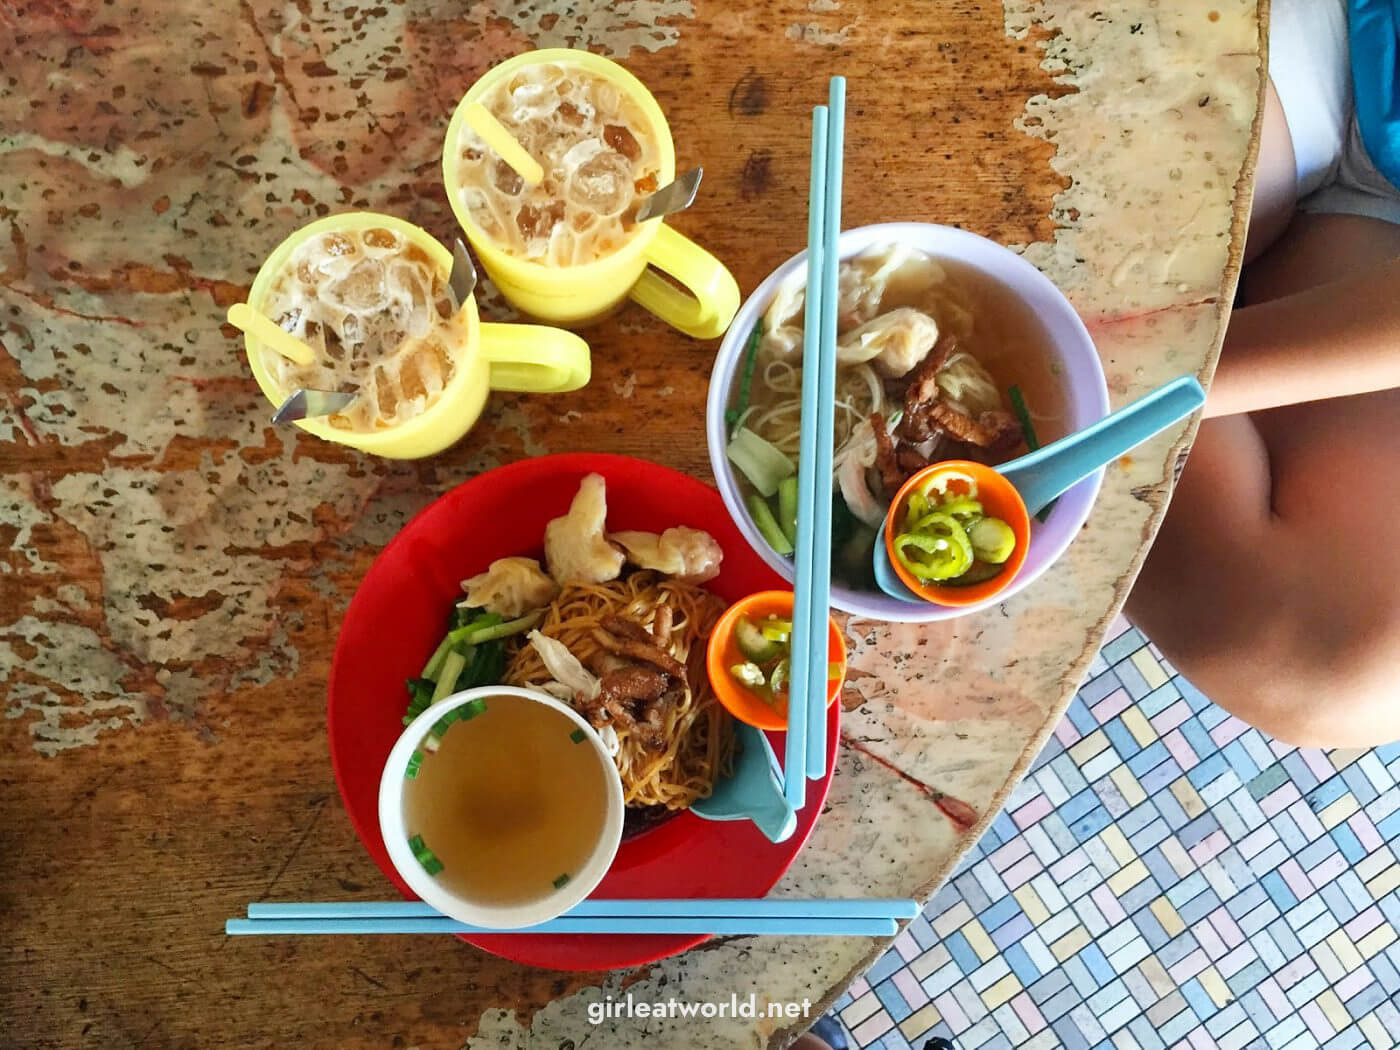 Penang Food Guide - Wantan Mee and Iced White Coffee